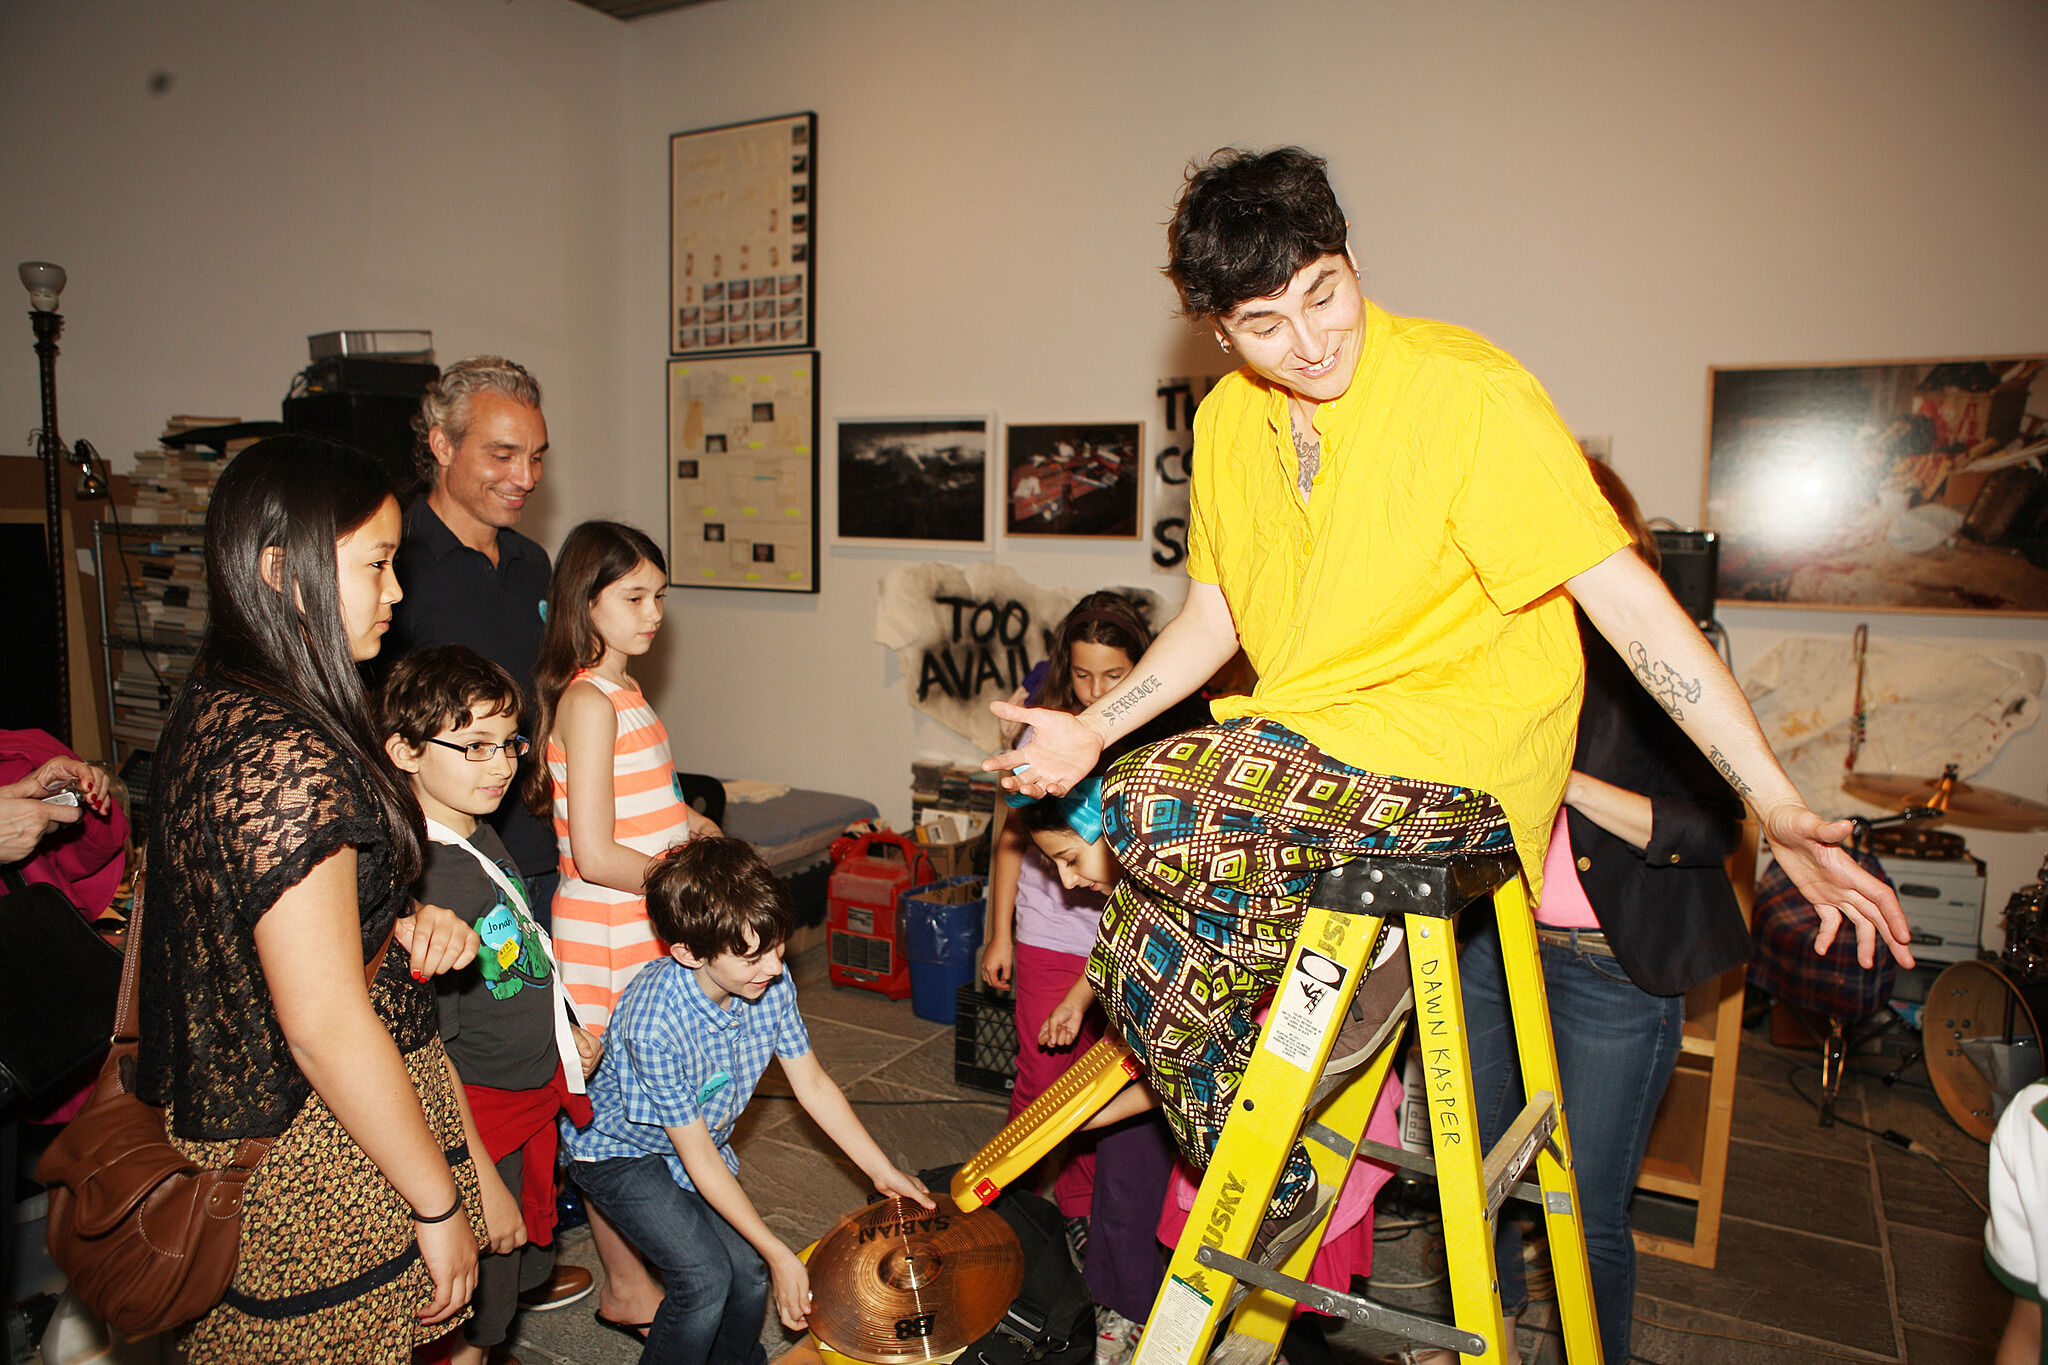 The artist sits on a ladder surrounded by families